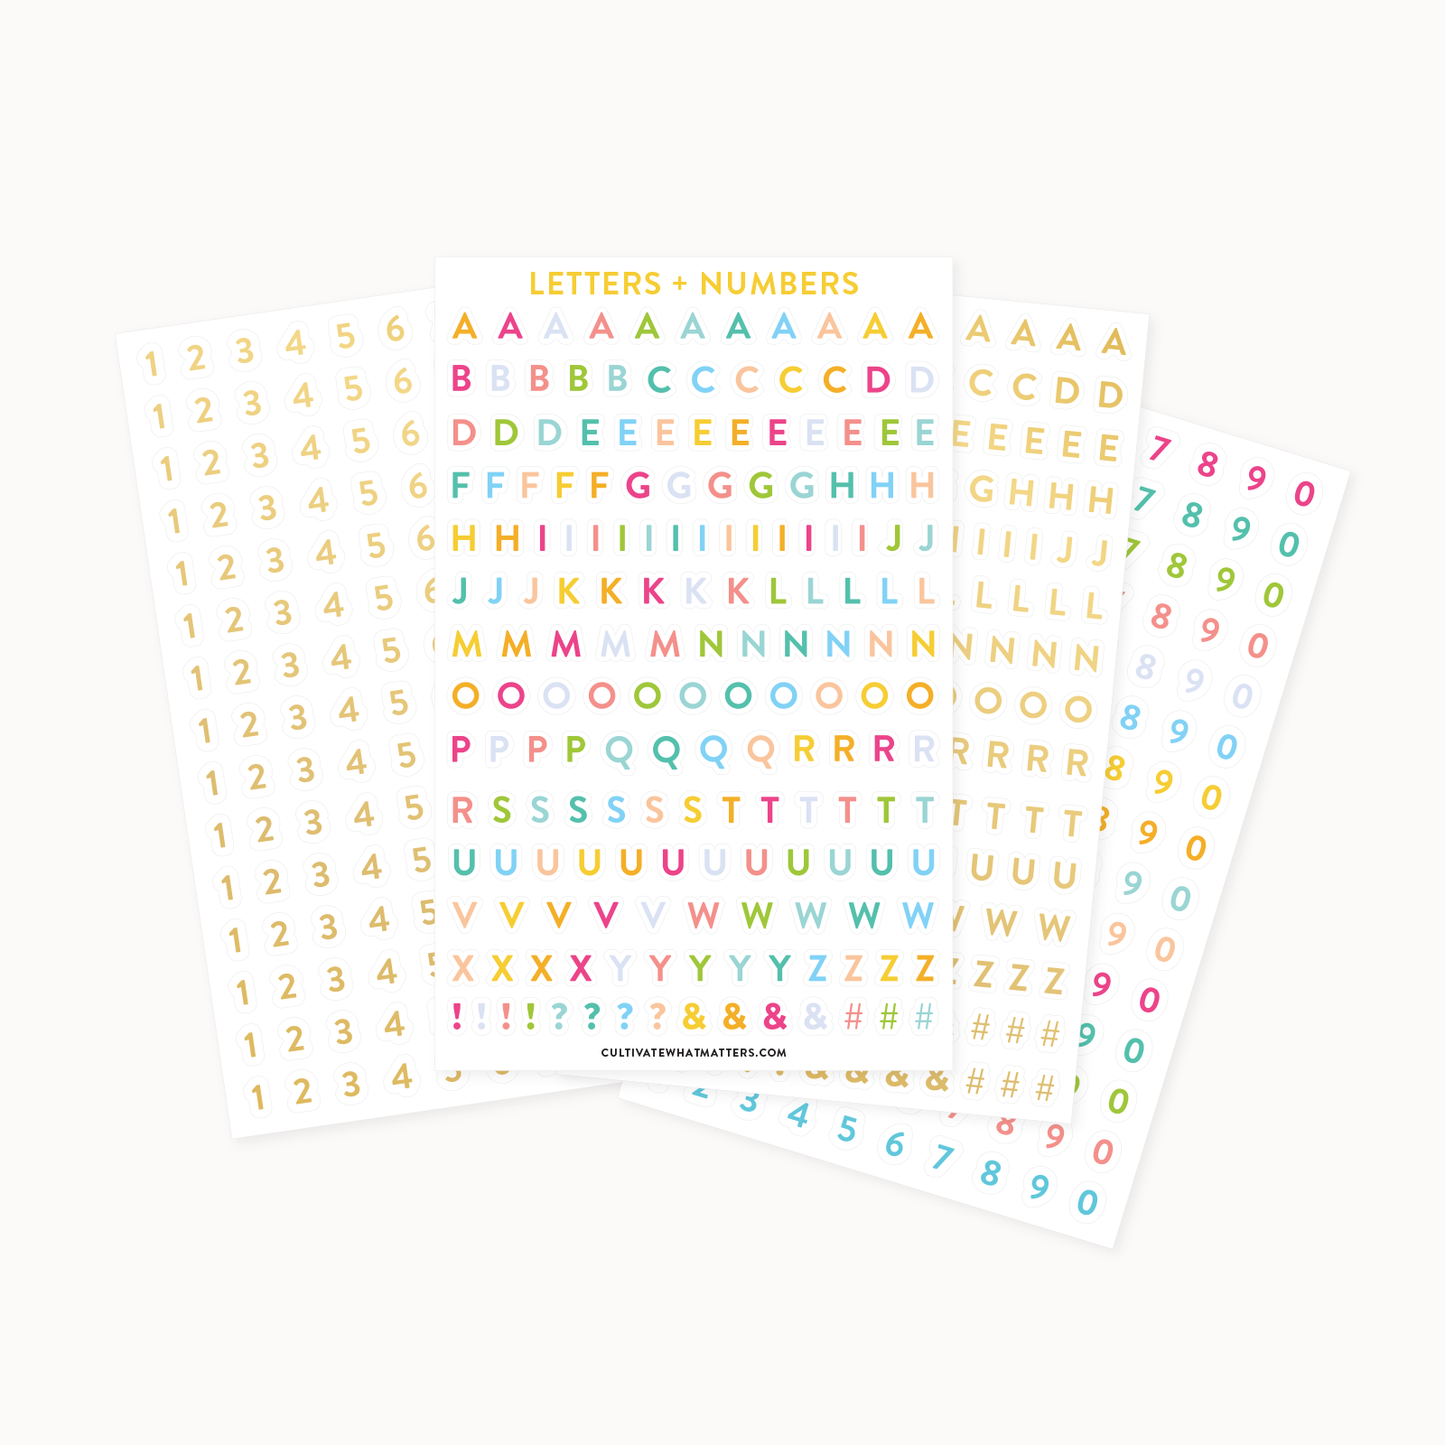 Bible Sticker Pack 6, Hand Lettered Stickers